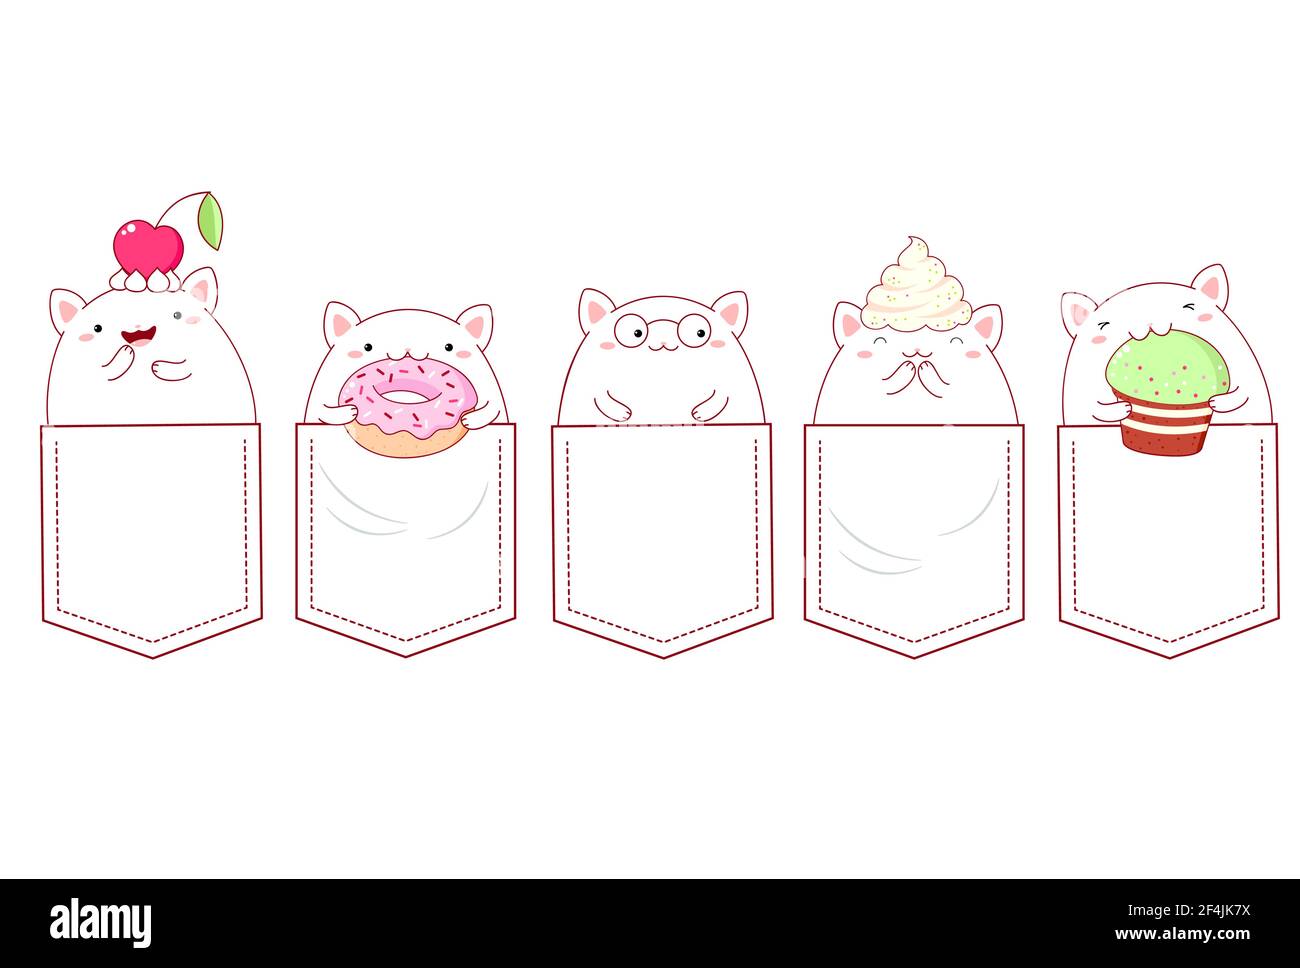 Cute cartoon characters pocket set. Baby collection of kawaii cats with donut, cupcake and cherry in pockets. Childish print with funny fat kitty for Stock Vector